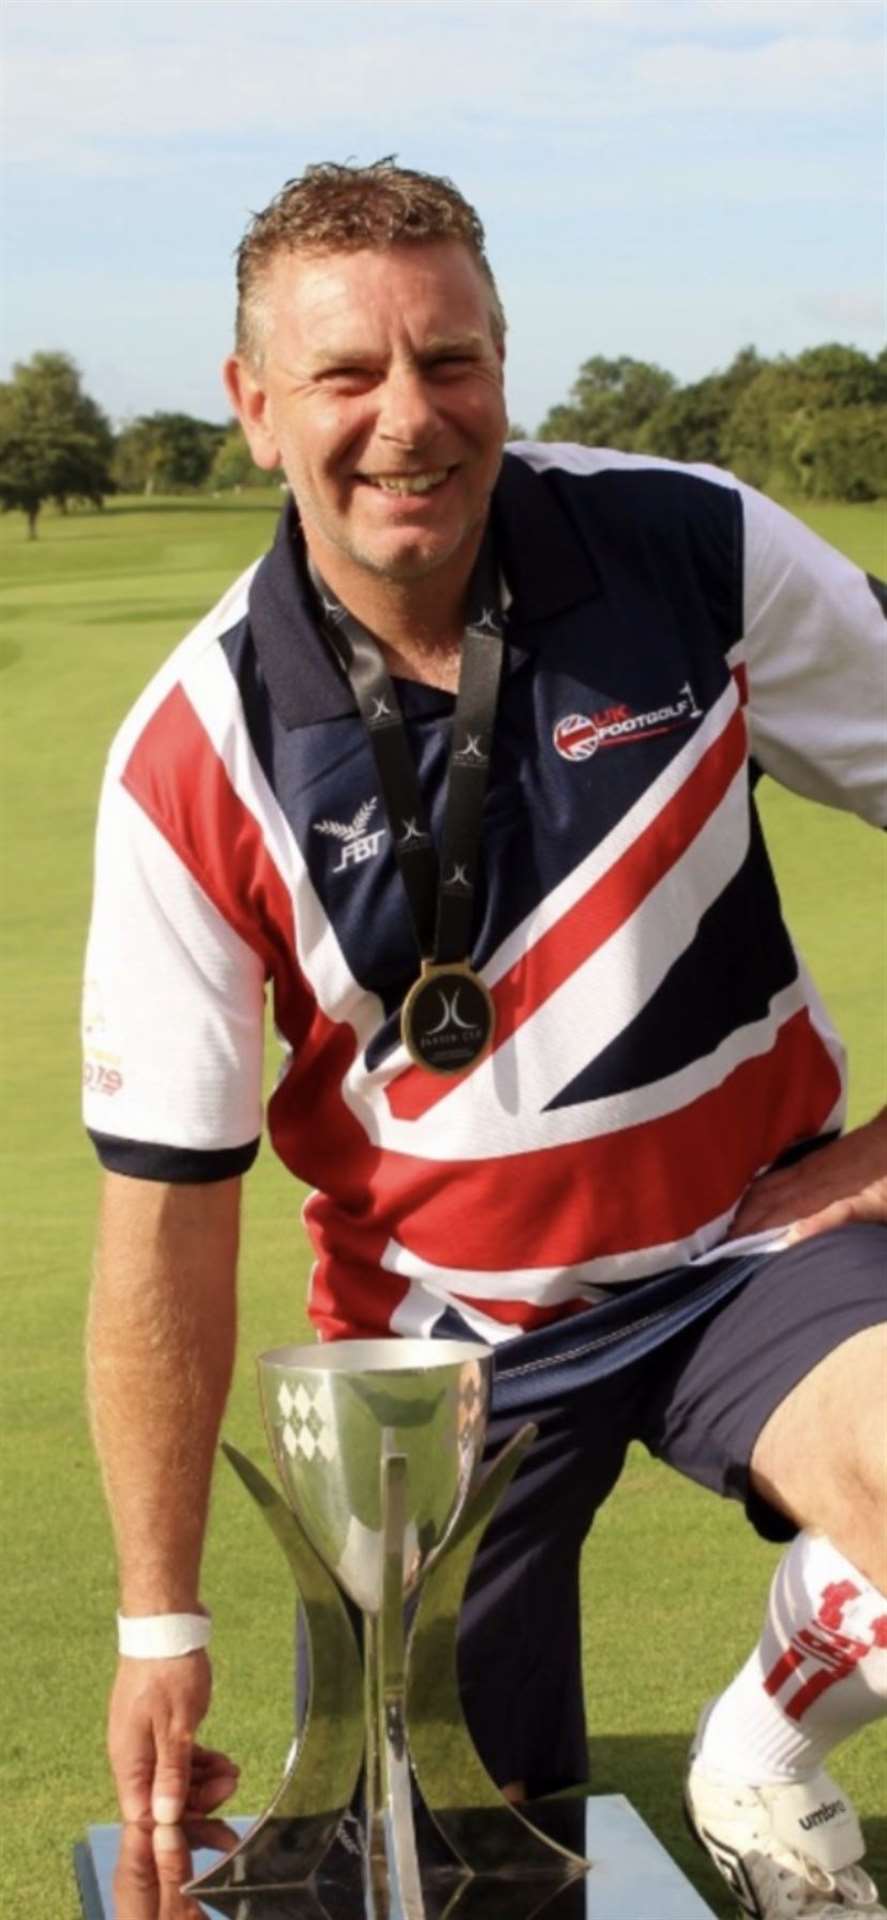 Chris Aldous with the Jansen Cup, the Ryder Cup of the footgolf world